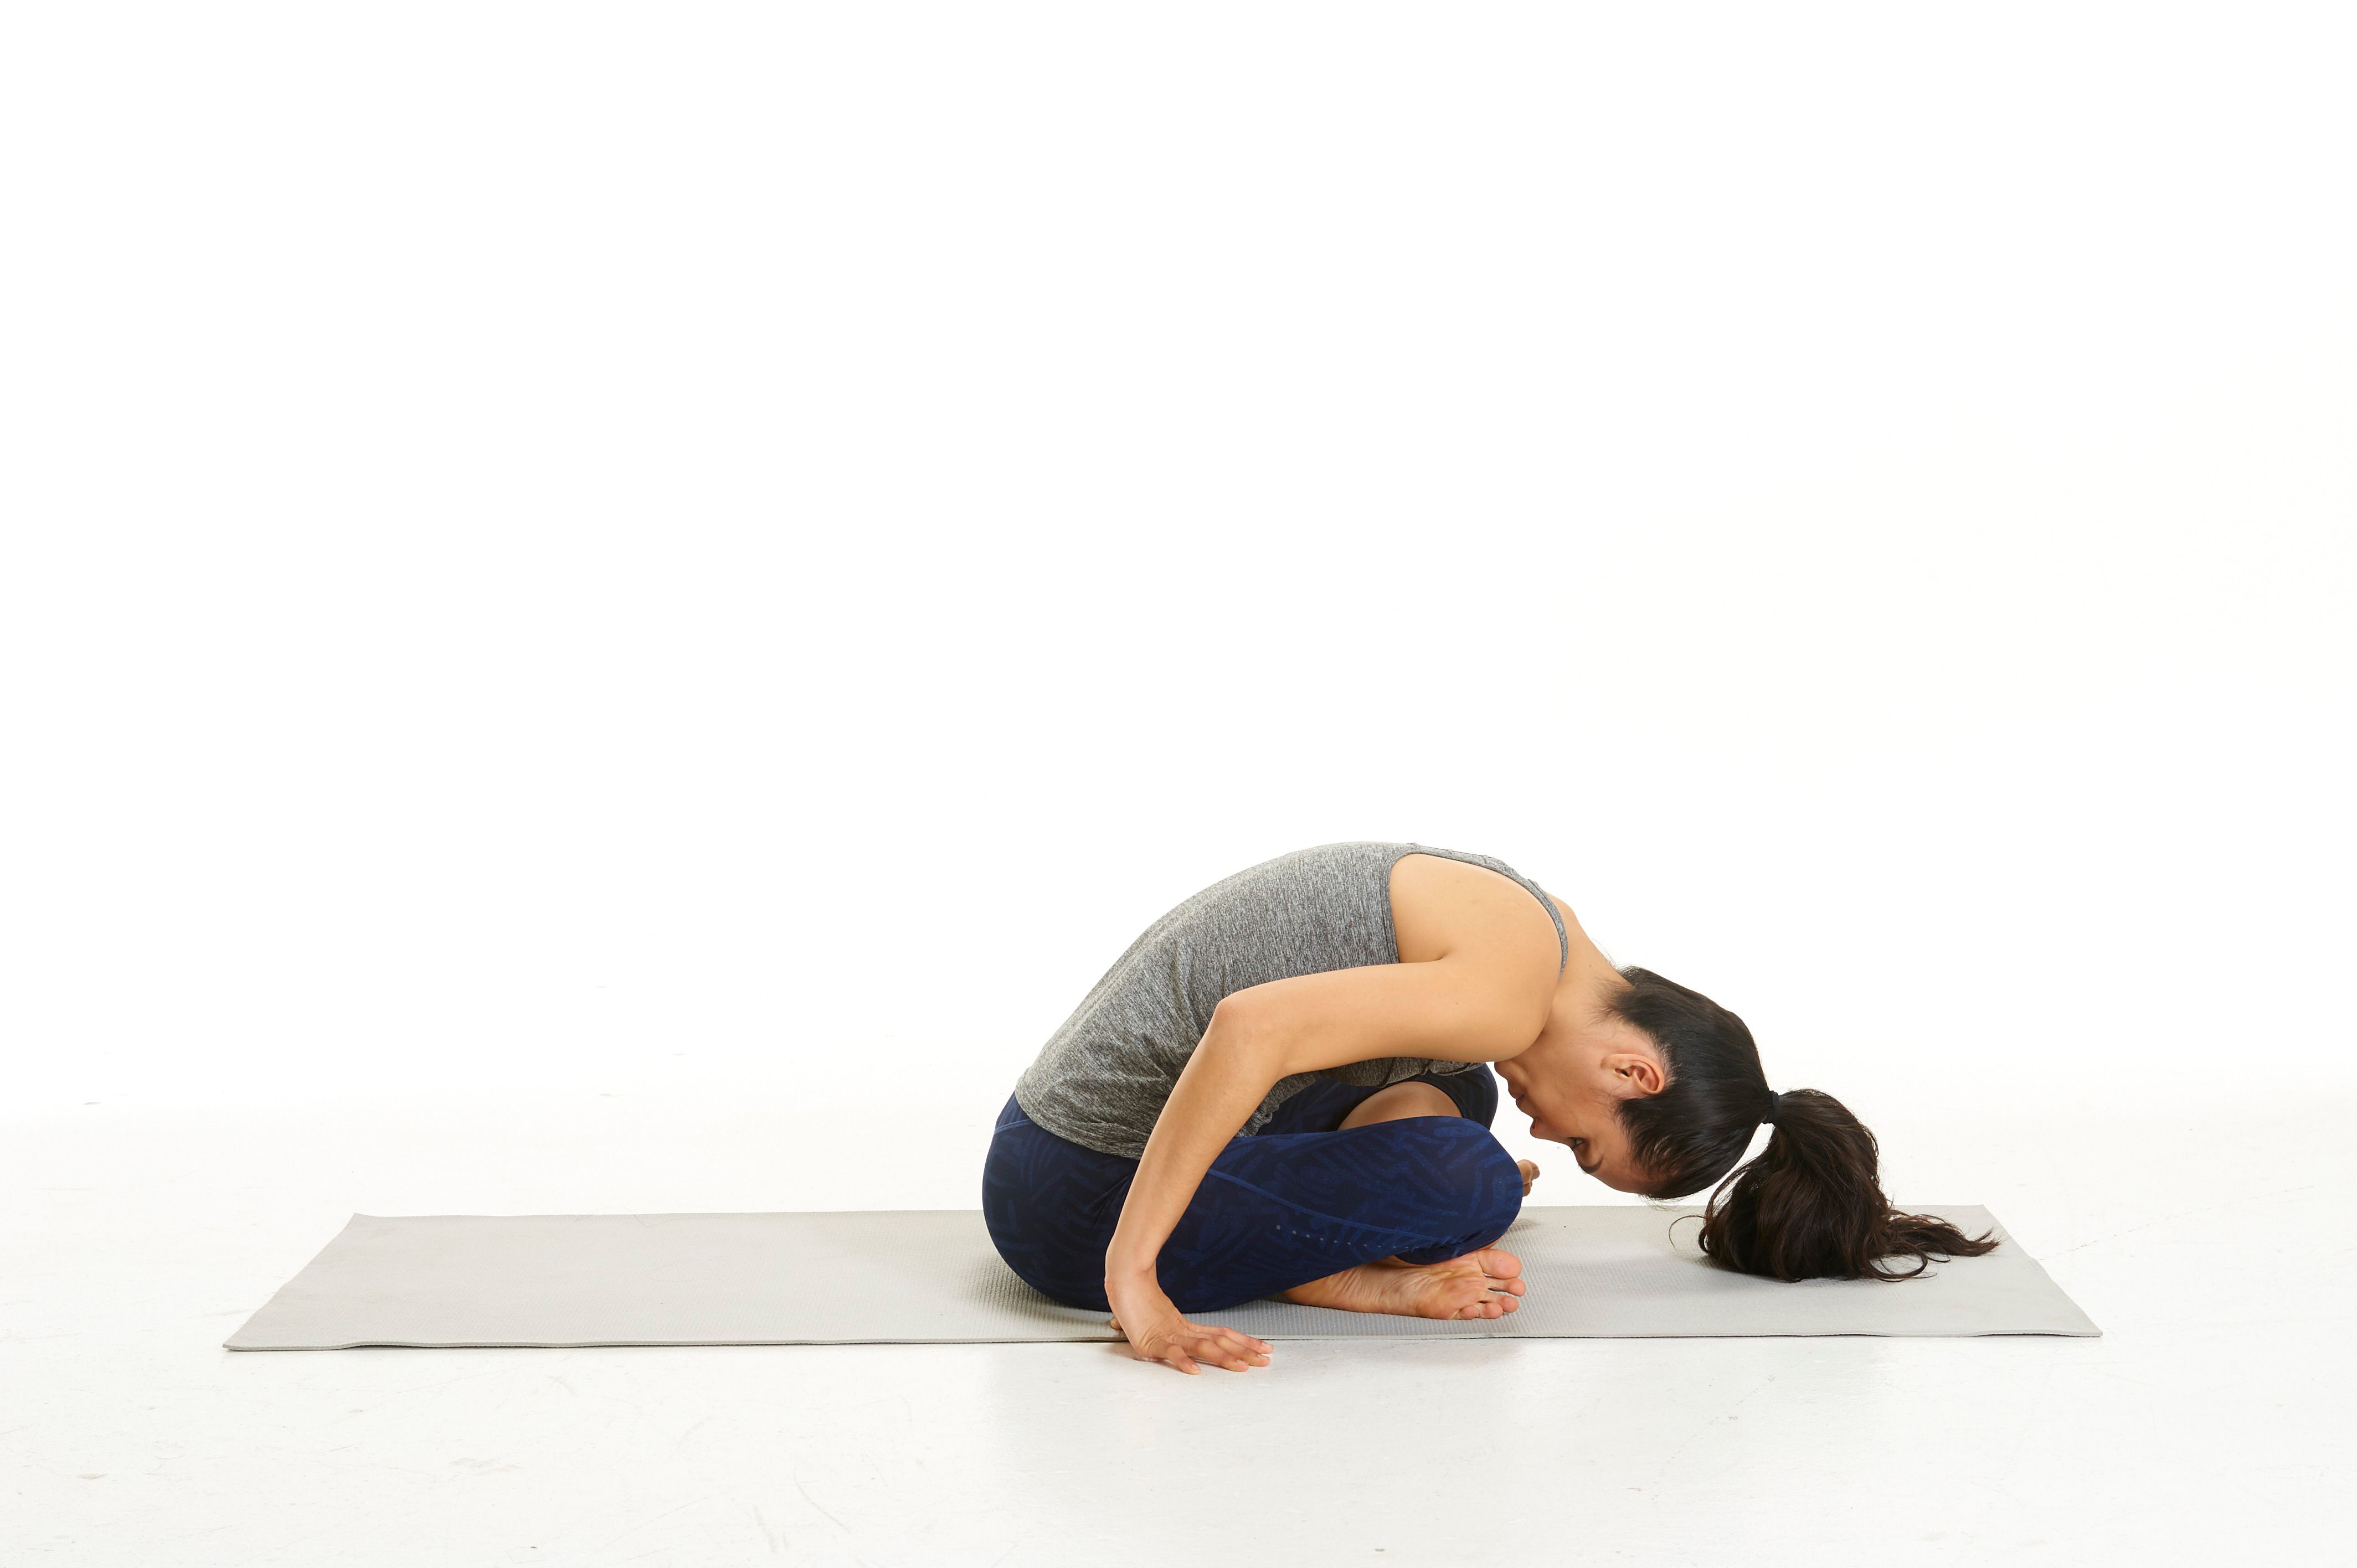 How to relieve back pain: 6 best yoga poses - Eco Health Lab